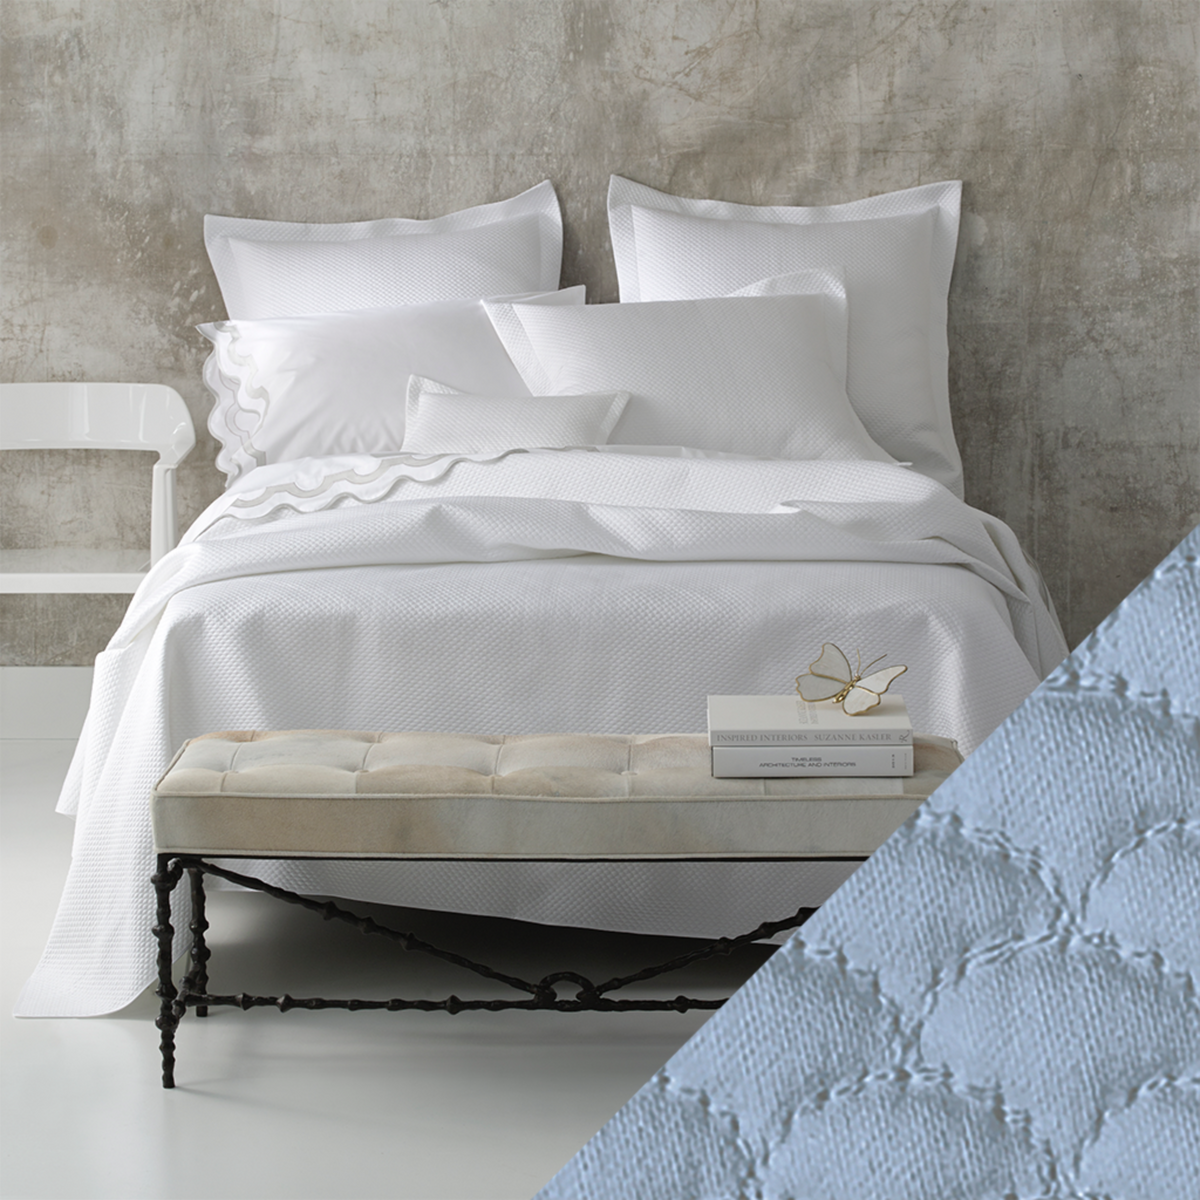 Full View of Matouk Alba Bedding with Hazy Blue Color Sample